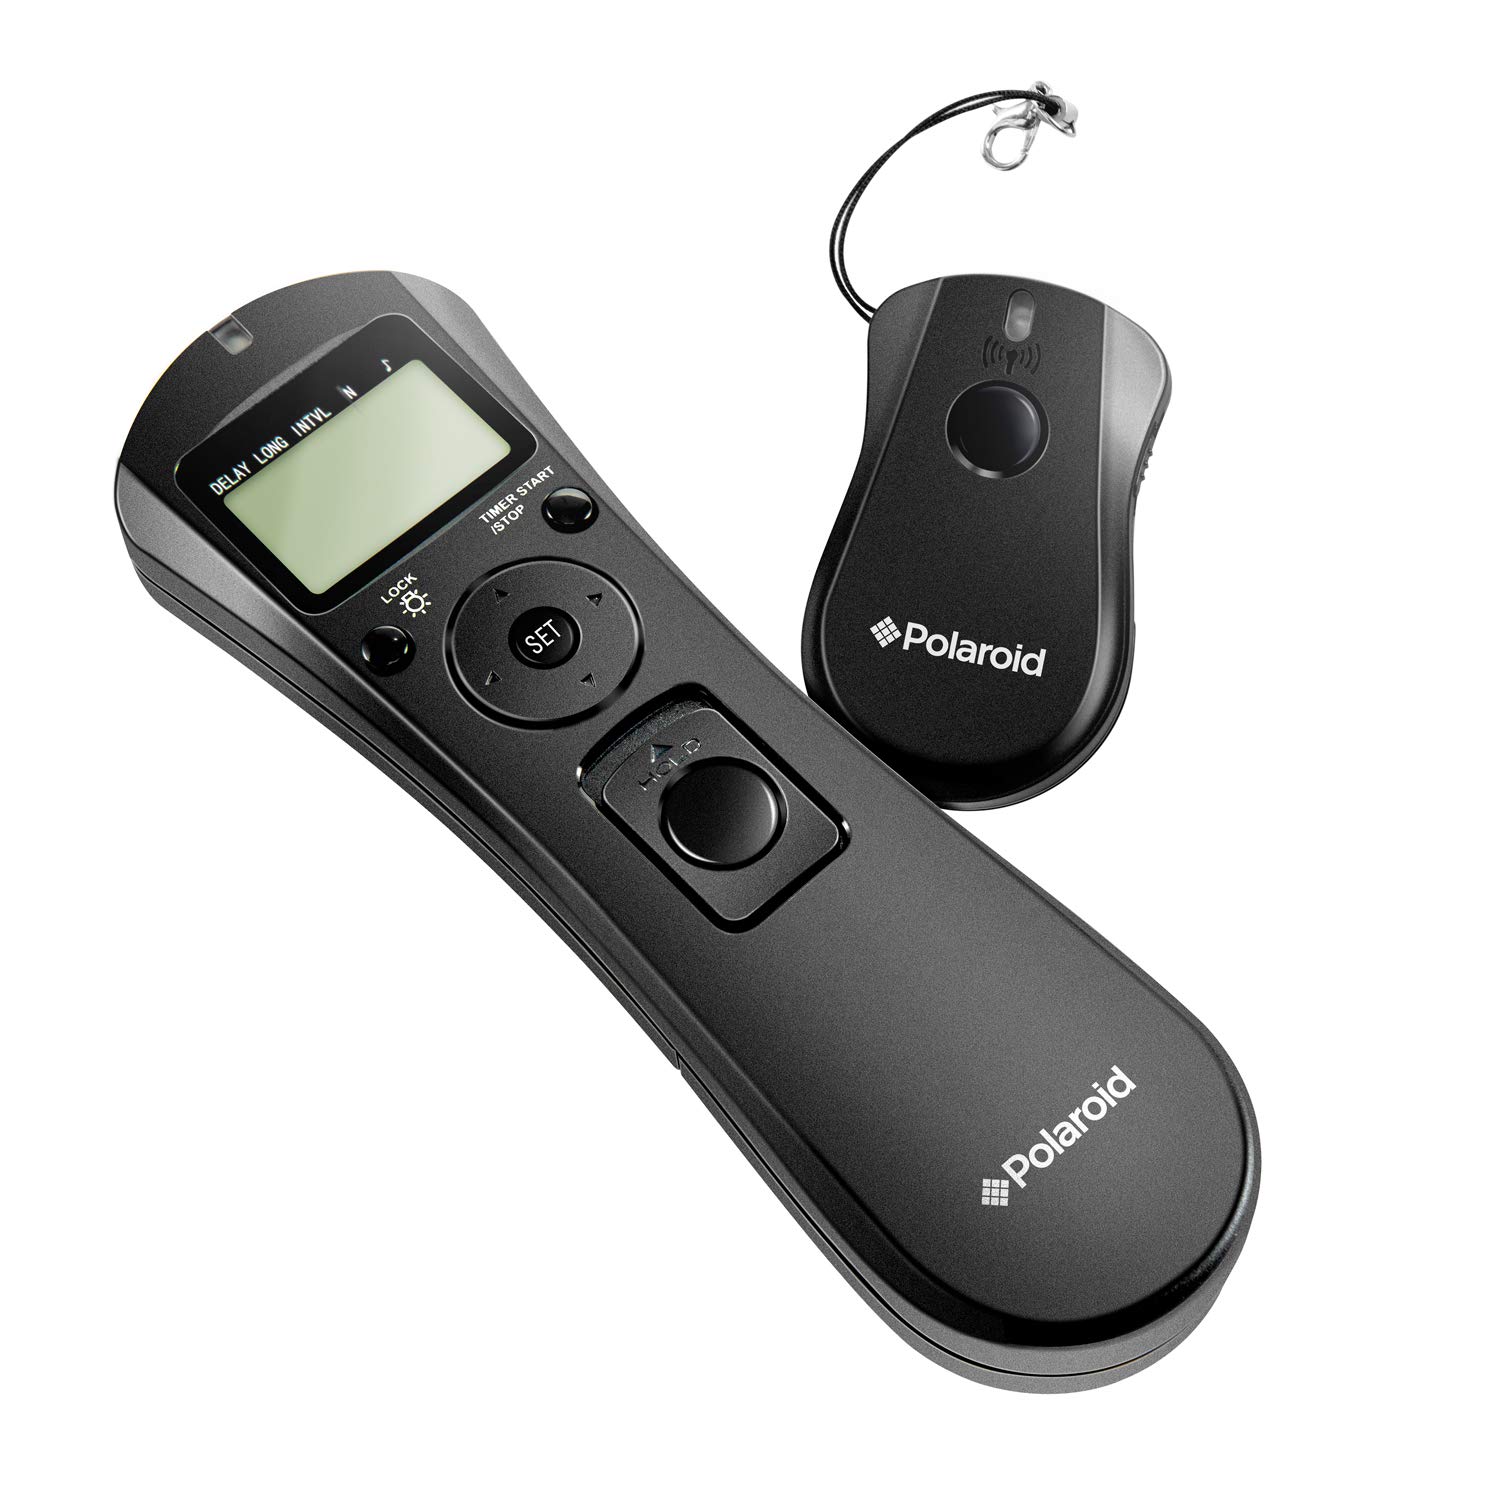 Polaroid Wireless Camera Shutter Remote w/Interval Timer - Includes Receiver, Handheld Transmitter w/Backlit Display & Connector Cable - Transmitter Enables Shooting Mode Switching w/o Need of Adjusting Camera Settings - Battery Operated For Nikon D90, D3